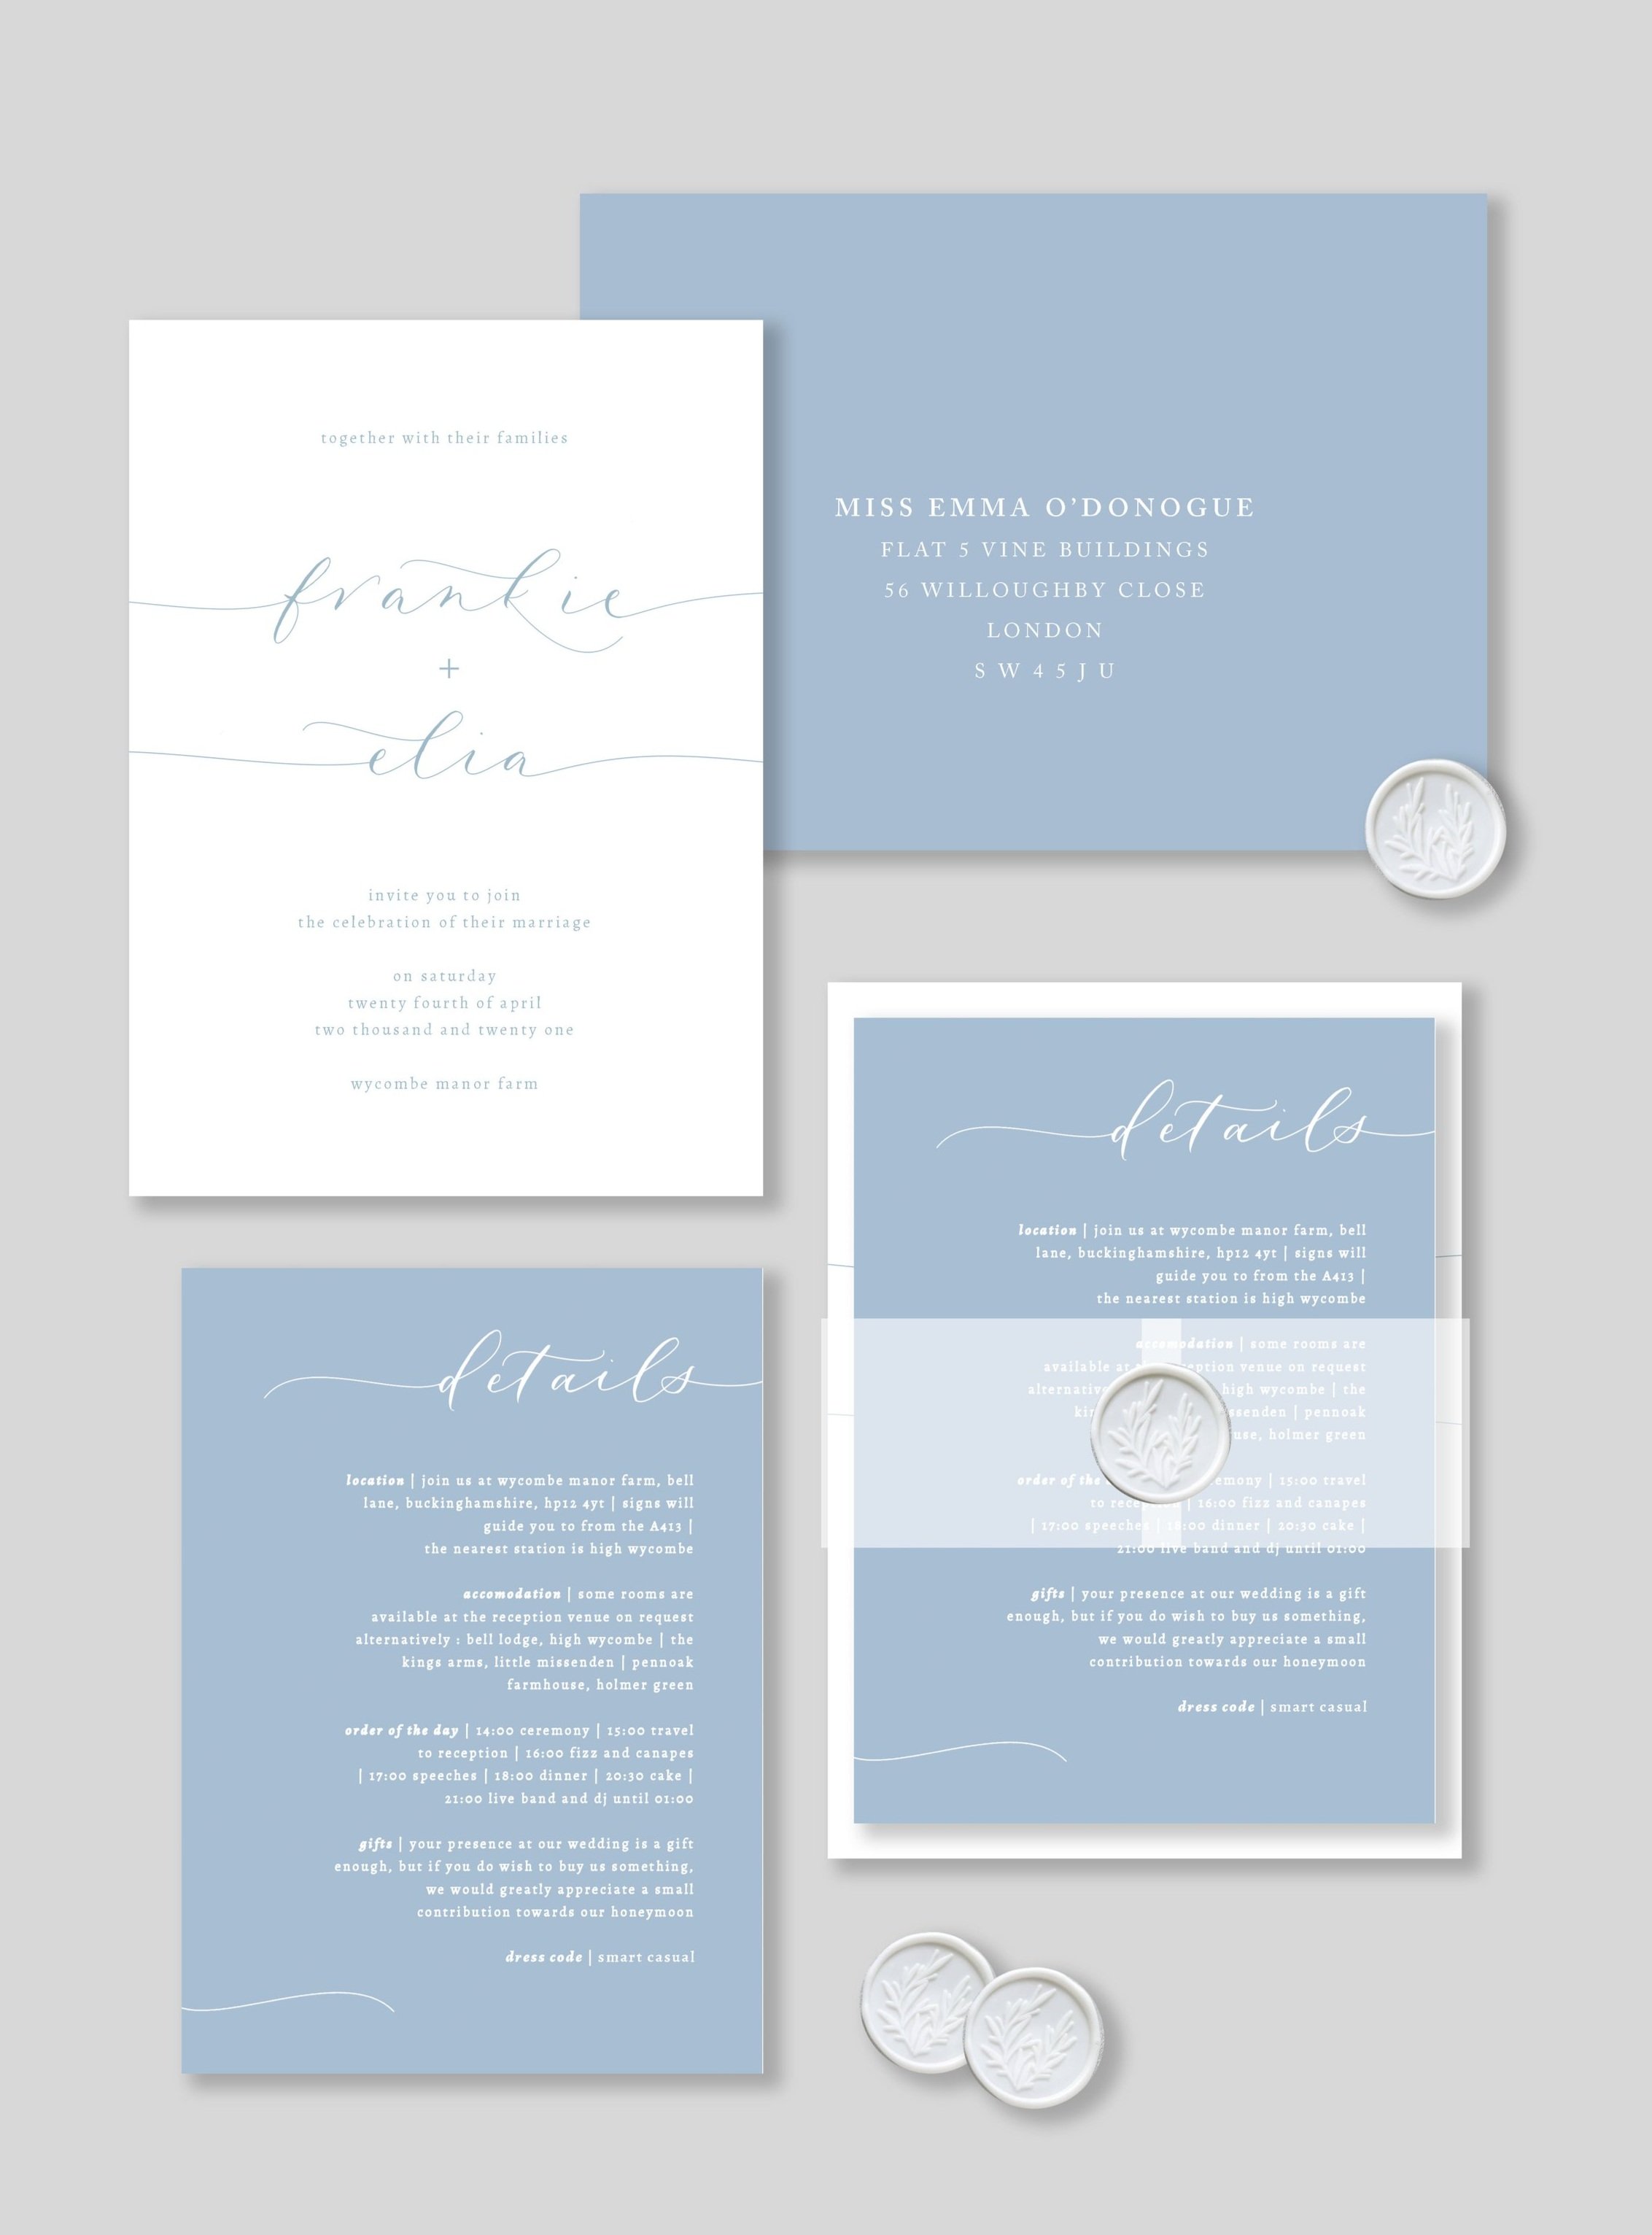 Dusty+Blue+Calligraphy+wedding+invitations+with+vellum+wrap+vellum+band+and+wax+seal.jpg